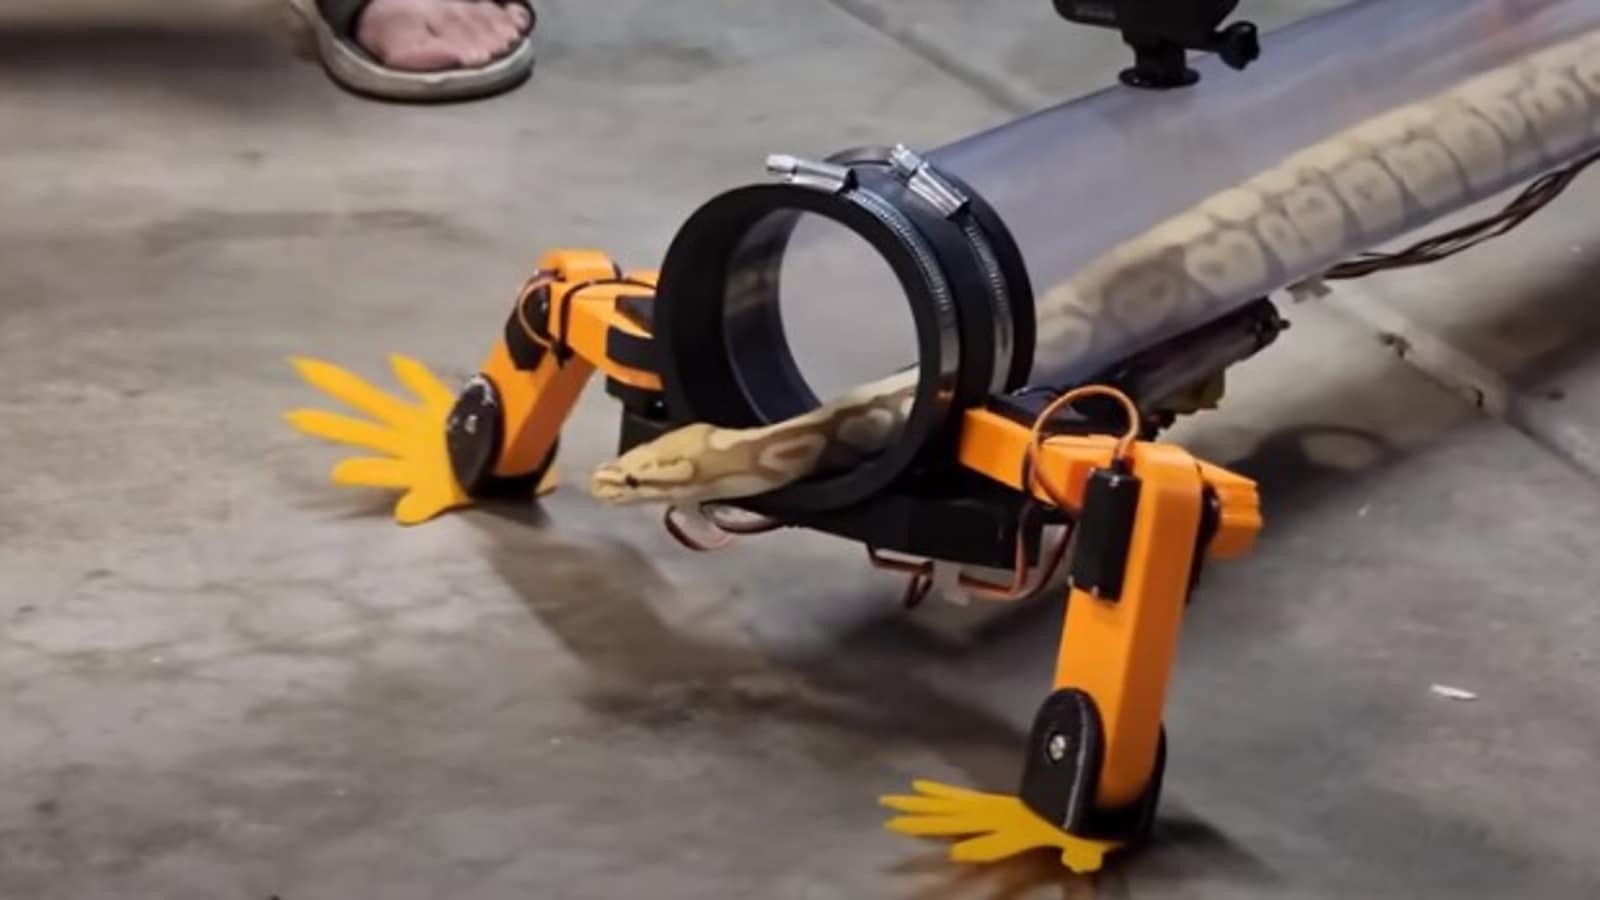 engineer-gives-robotic-legs-to-snake-to-help-it-walk-youtube-reacts